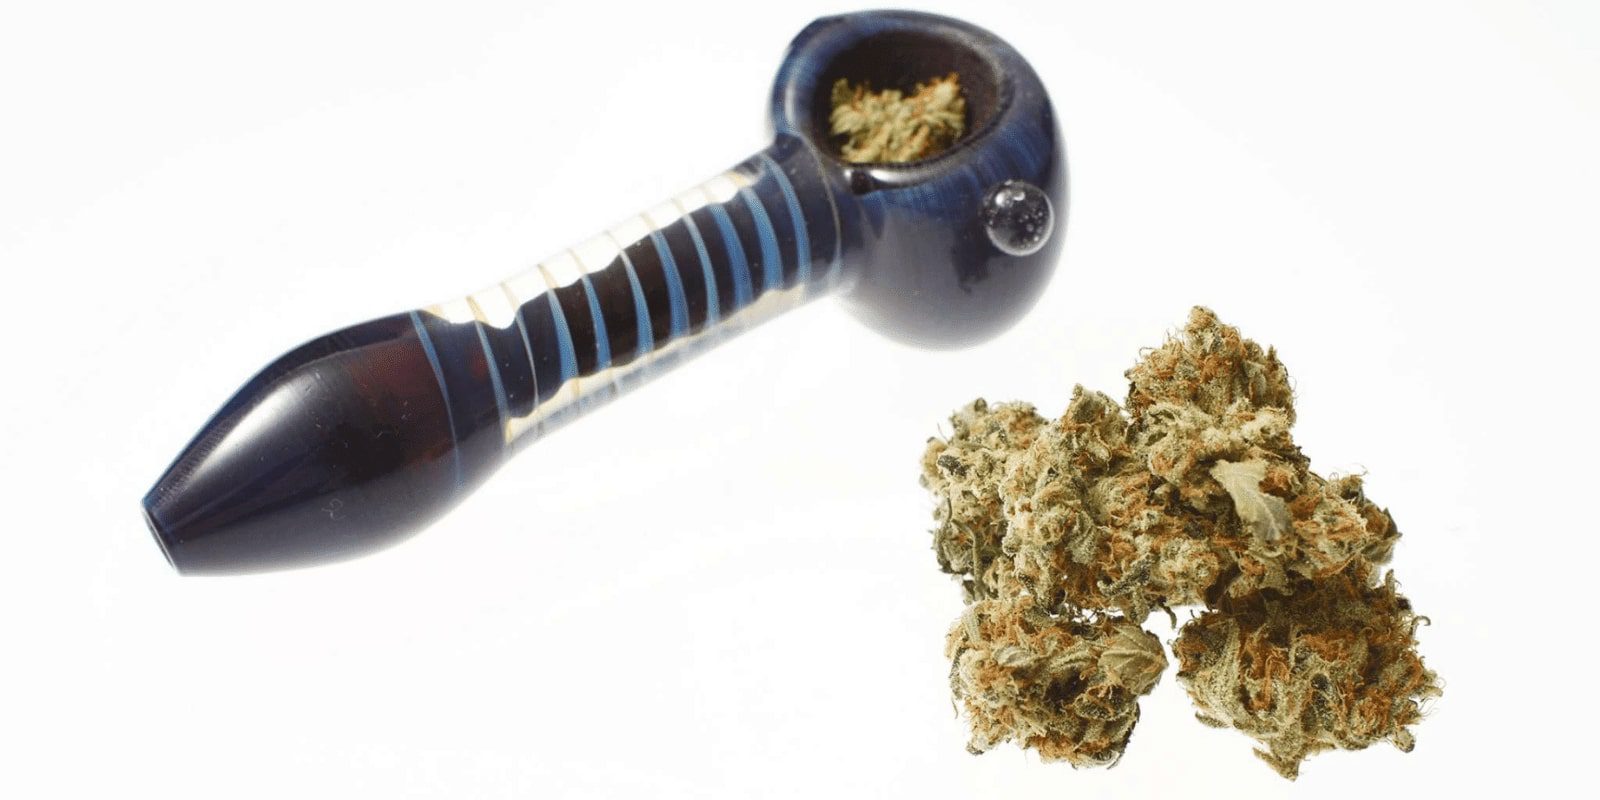 Marijuana Pipes – How to Smoke From and Use a Weed Pipe 